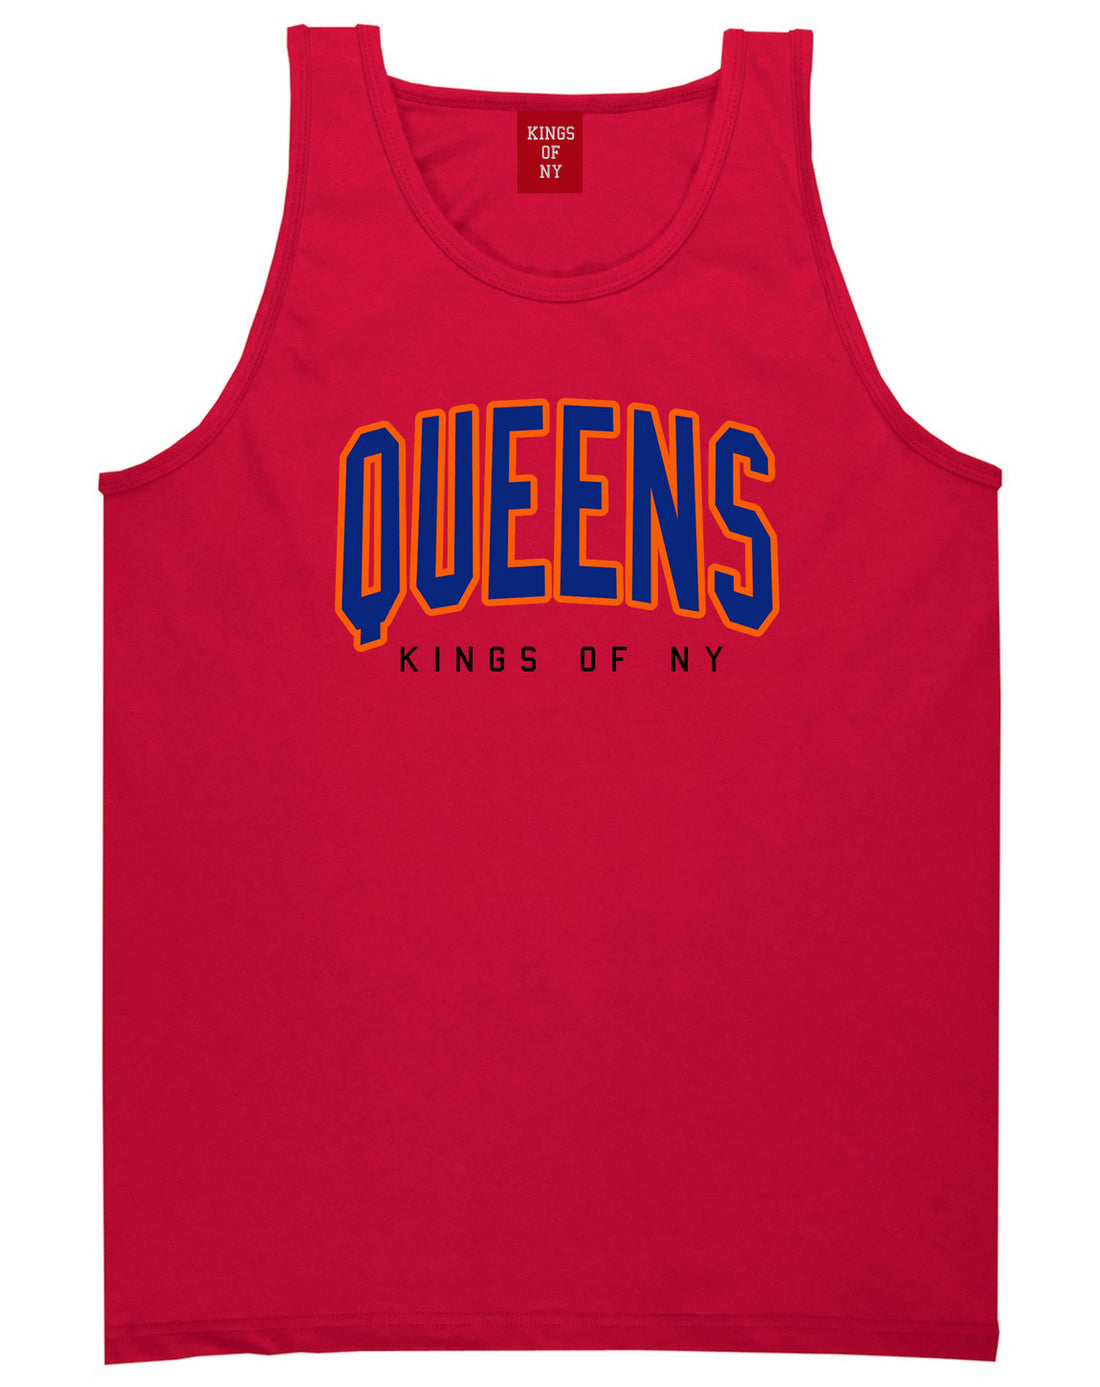 Queens Blue Orange Mens Tank Top Shirt Red by Kings Of NY